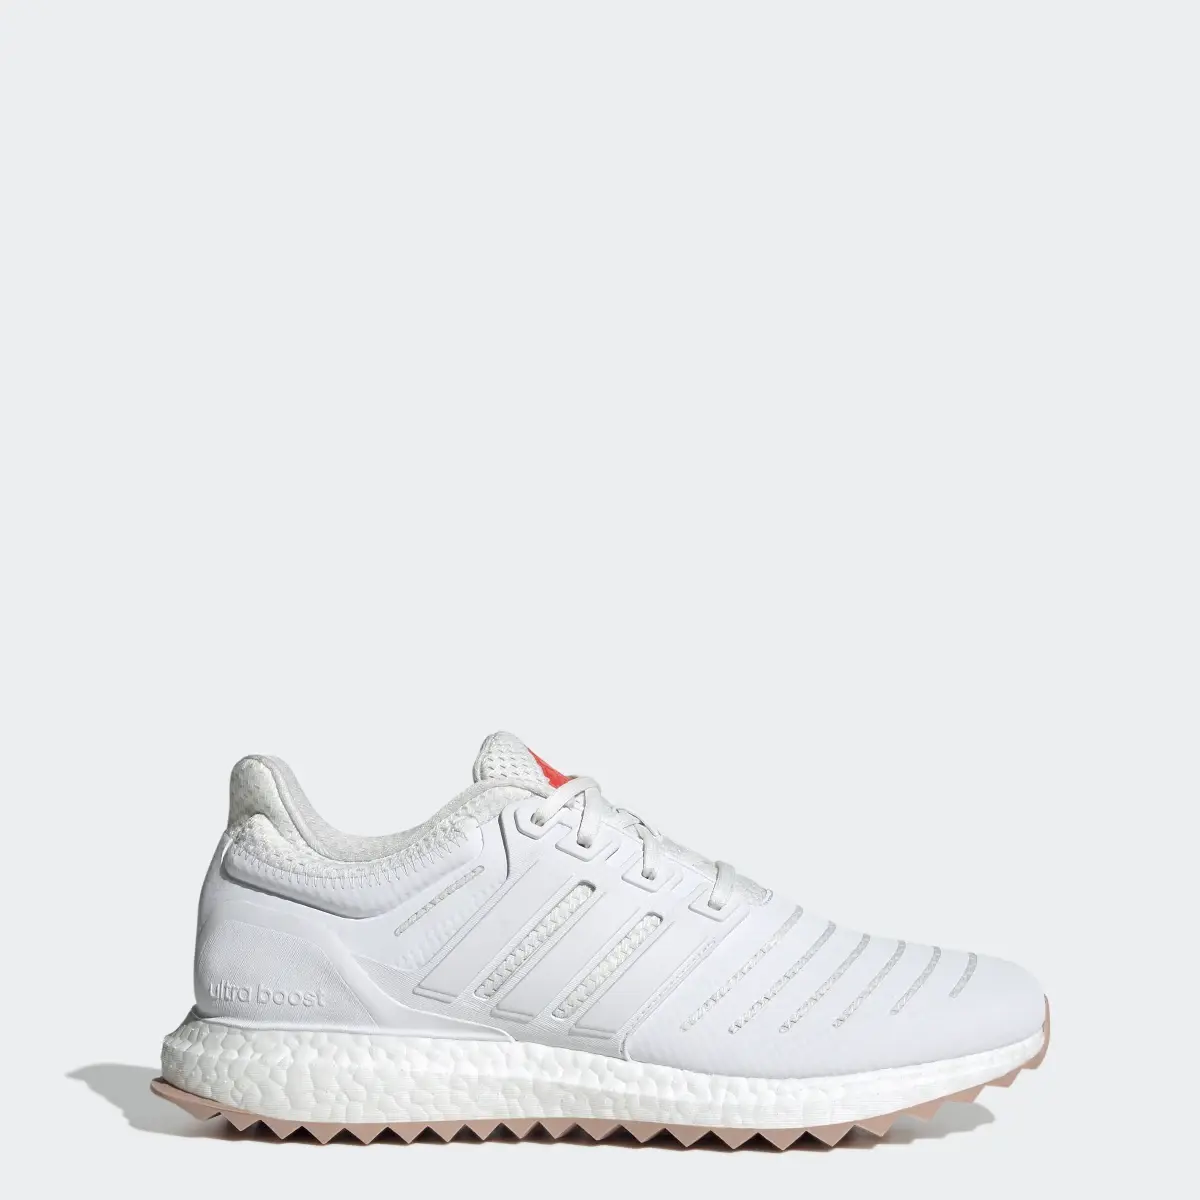 Adidas Ultraboost DNA XXII Lifestyle Running Sportswear Capsule Collection Shoes. 1